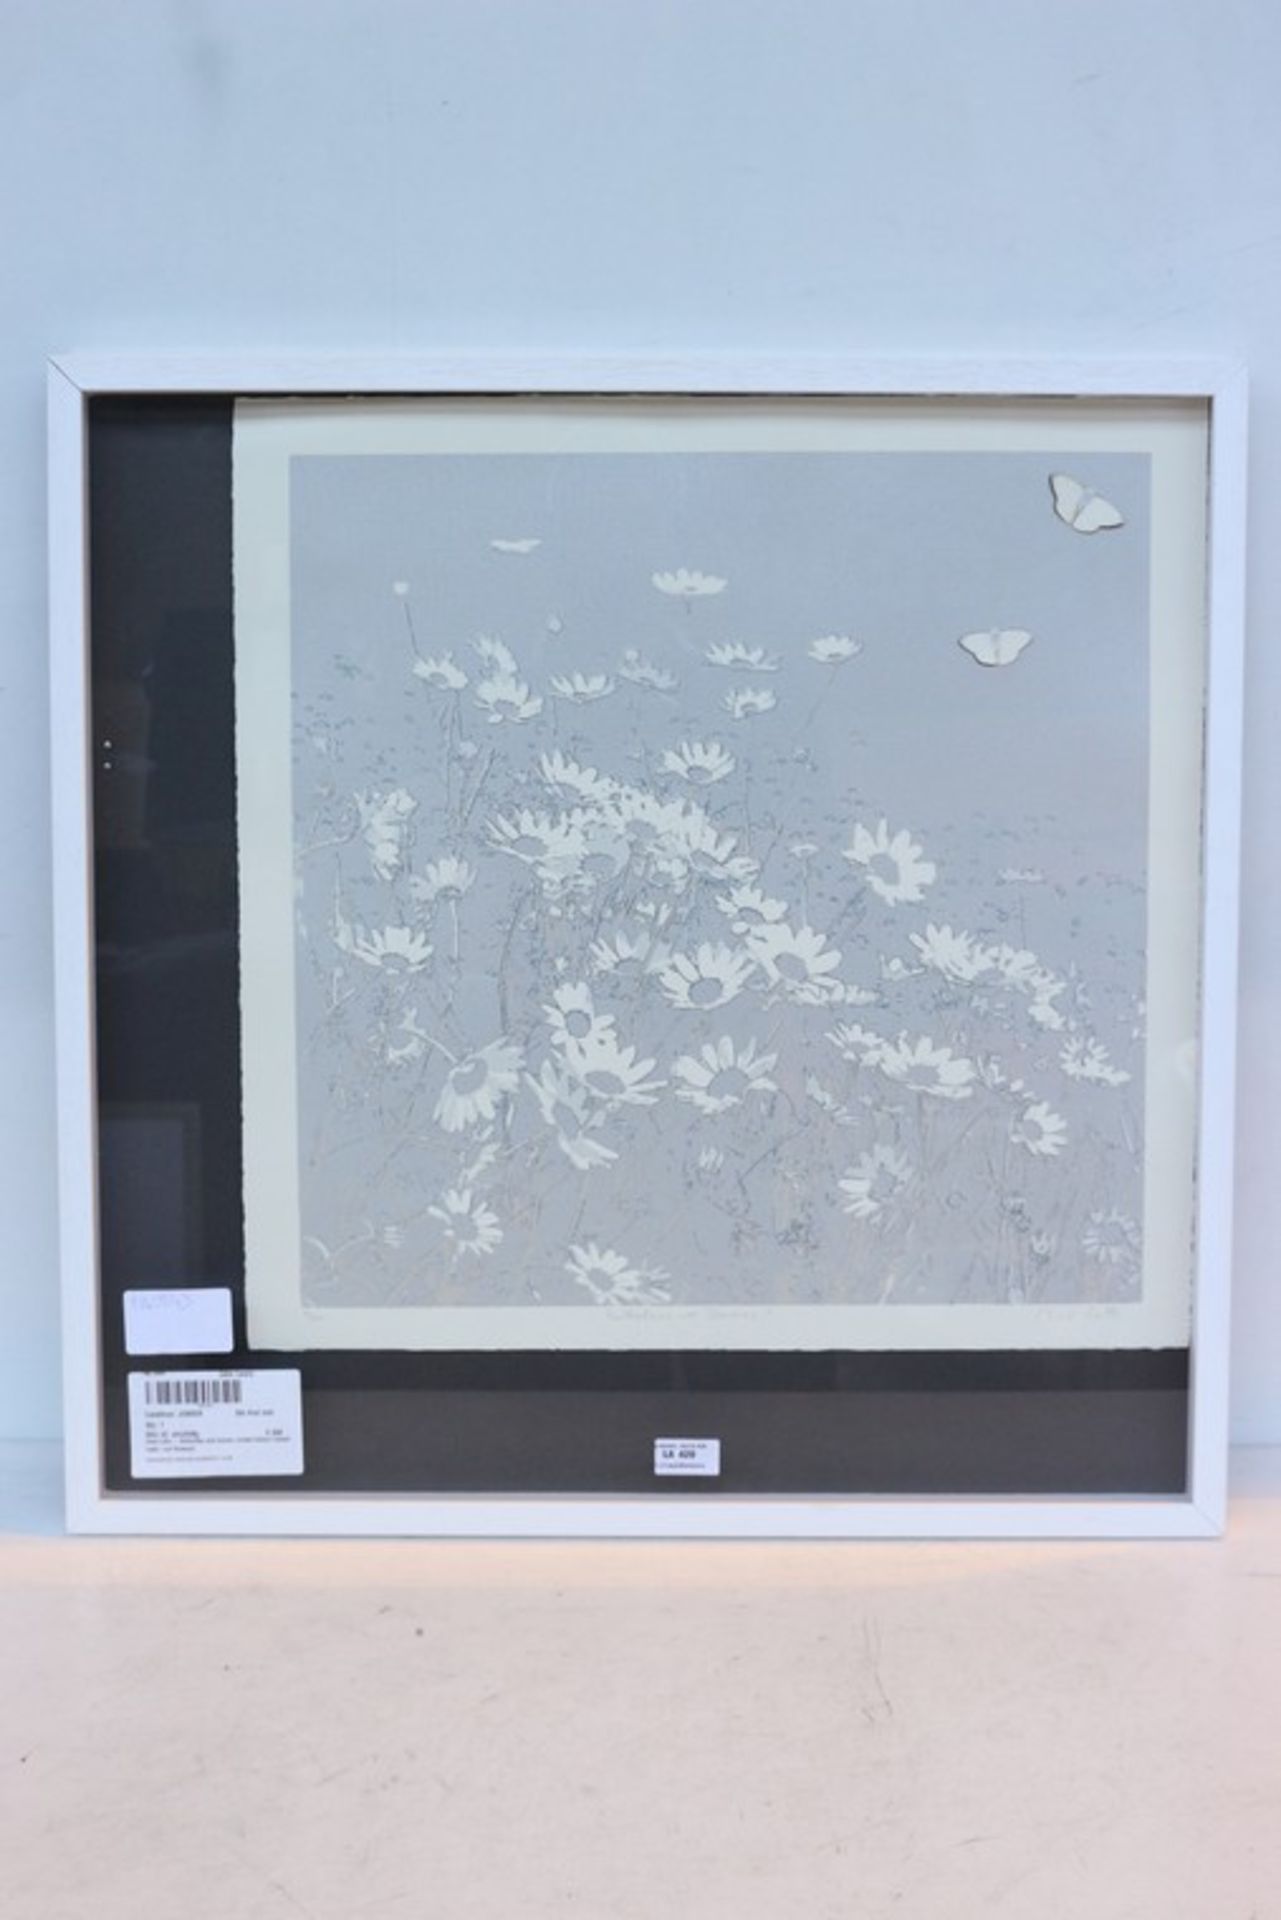 1 x CLAIRE CUTS BUTTERFLIES AND DAISIES LIMITED EDITION FRAMED LASER CUT FRAME RRP £400 (22.5.17) *